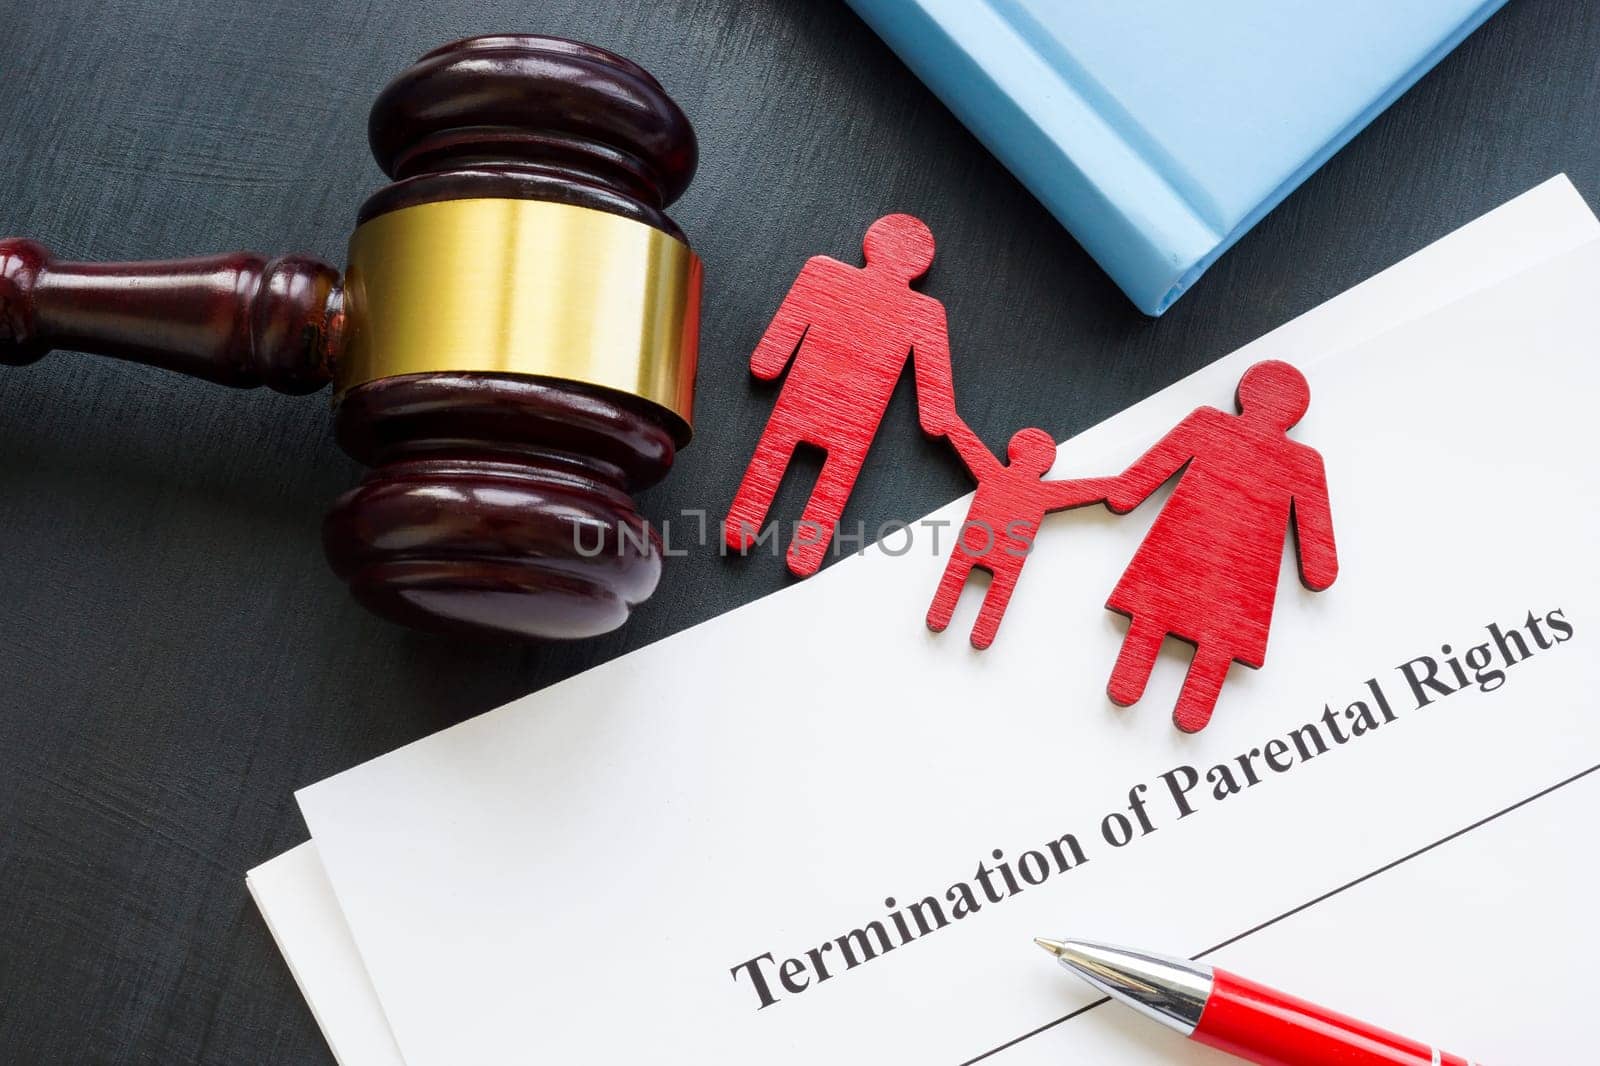 Documents about Termination of parental rights and wooden family figurines.